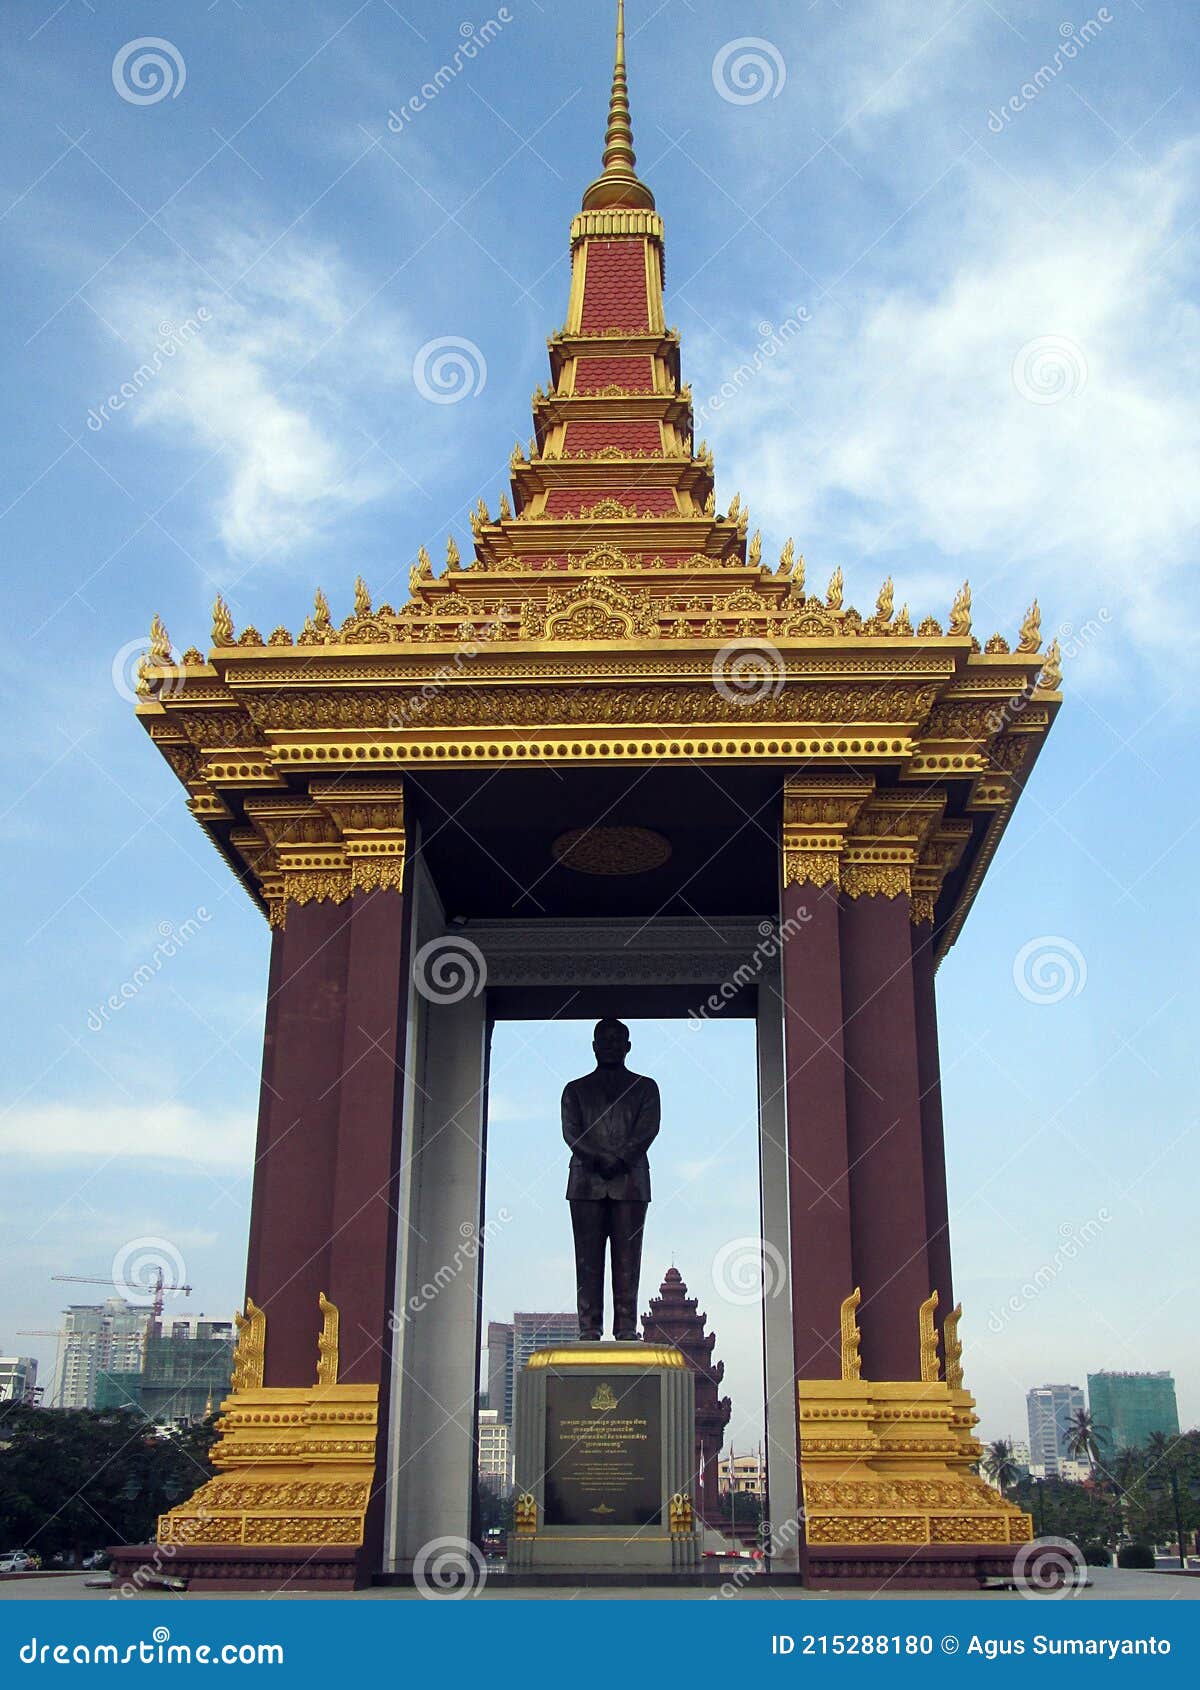 the monument of norodom sihanouk in the middle of city, cambodia